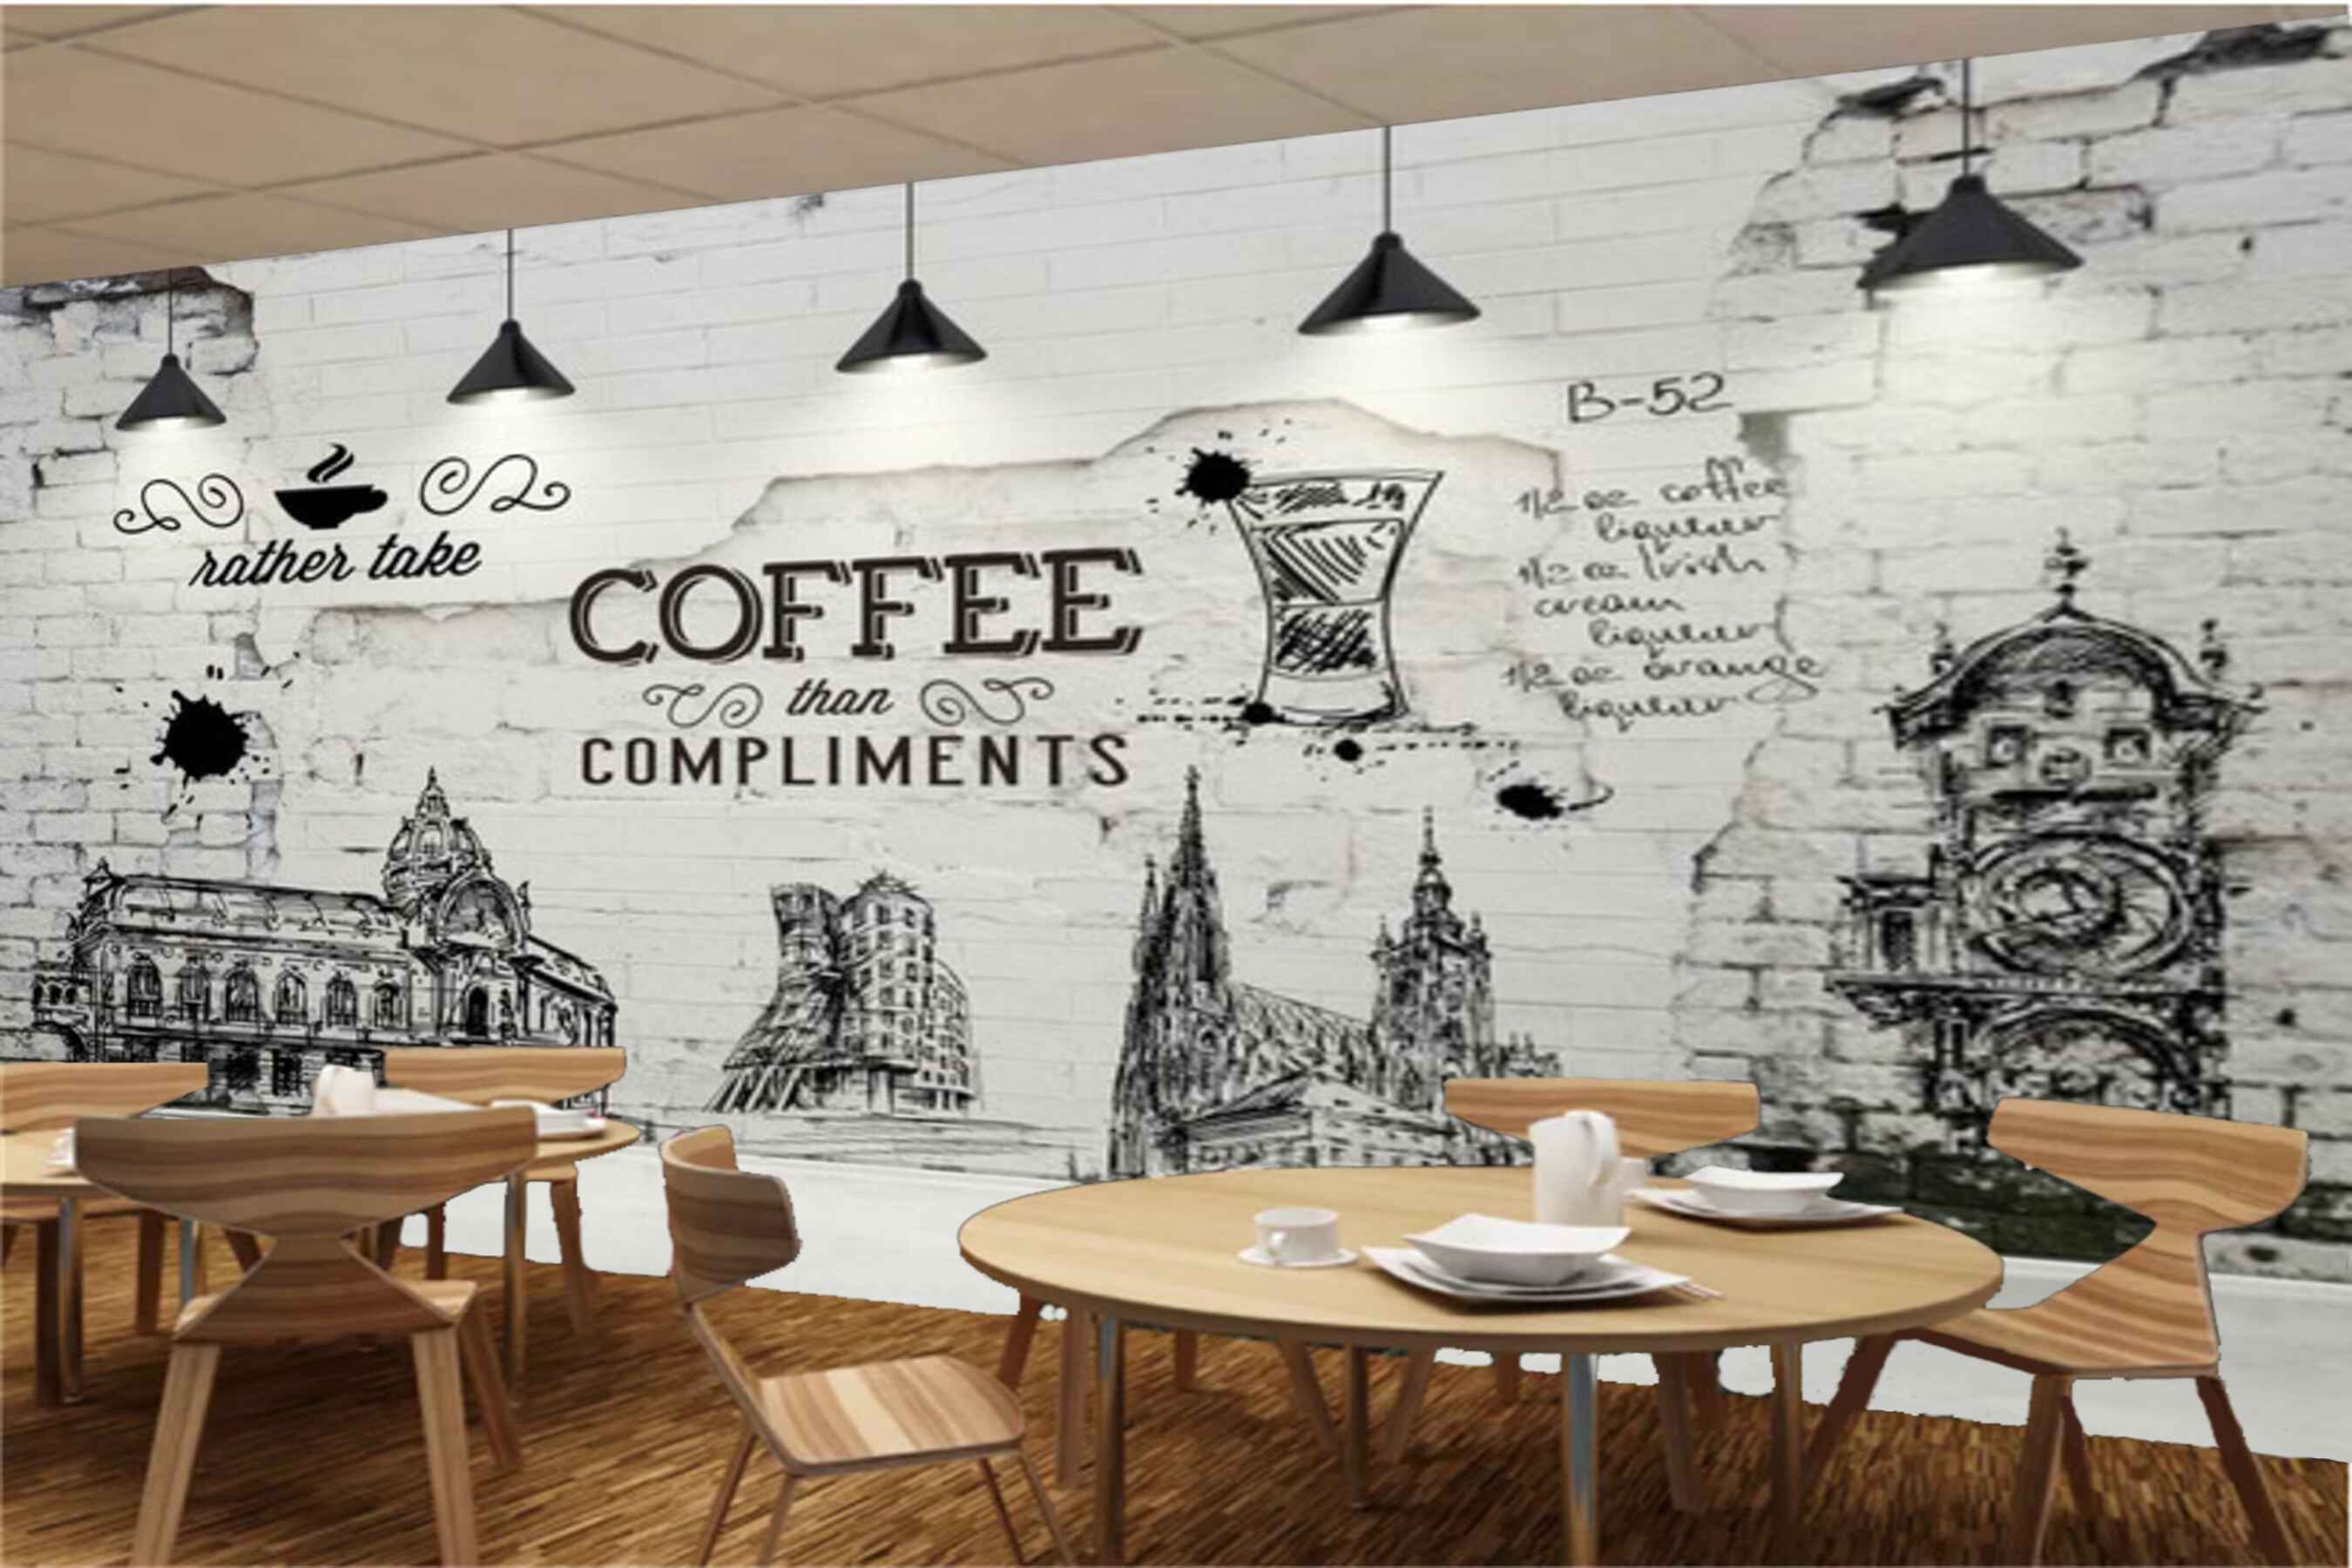 Avikalp MWZ3090 Coffee Monuments Lamps HD Wallpaper for Cafe Restaurant